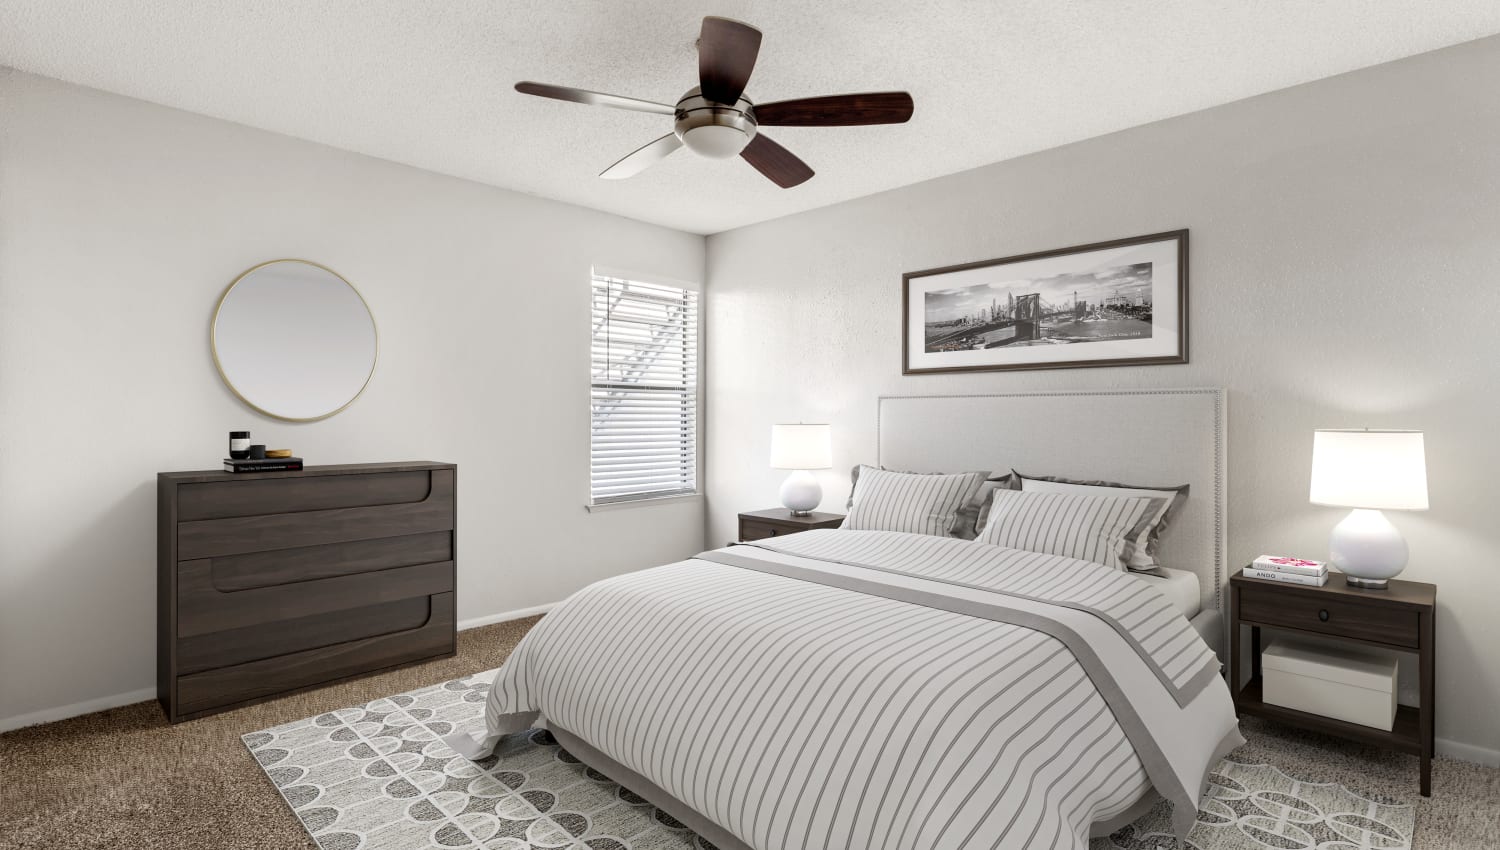 Bedroom with ceiling fan at Cielo on Gilbert in Mesa, Arizona